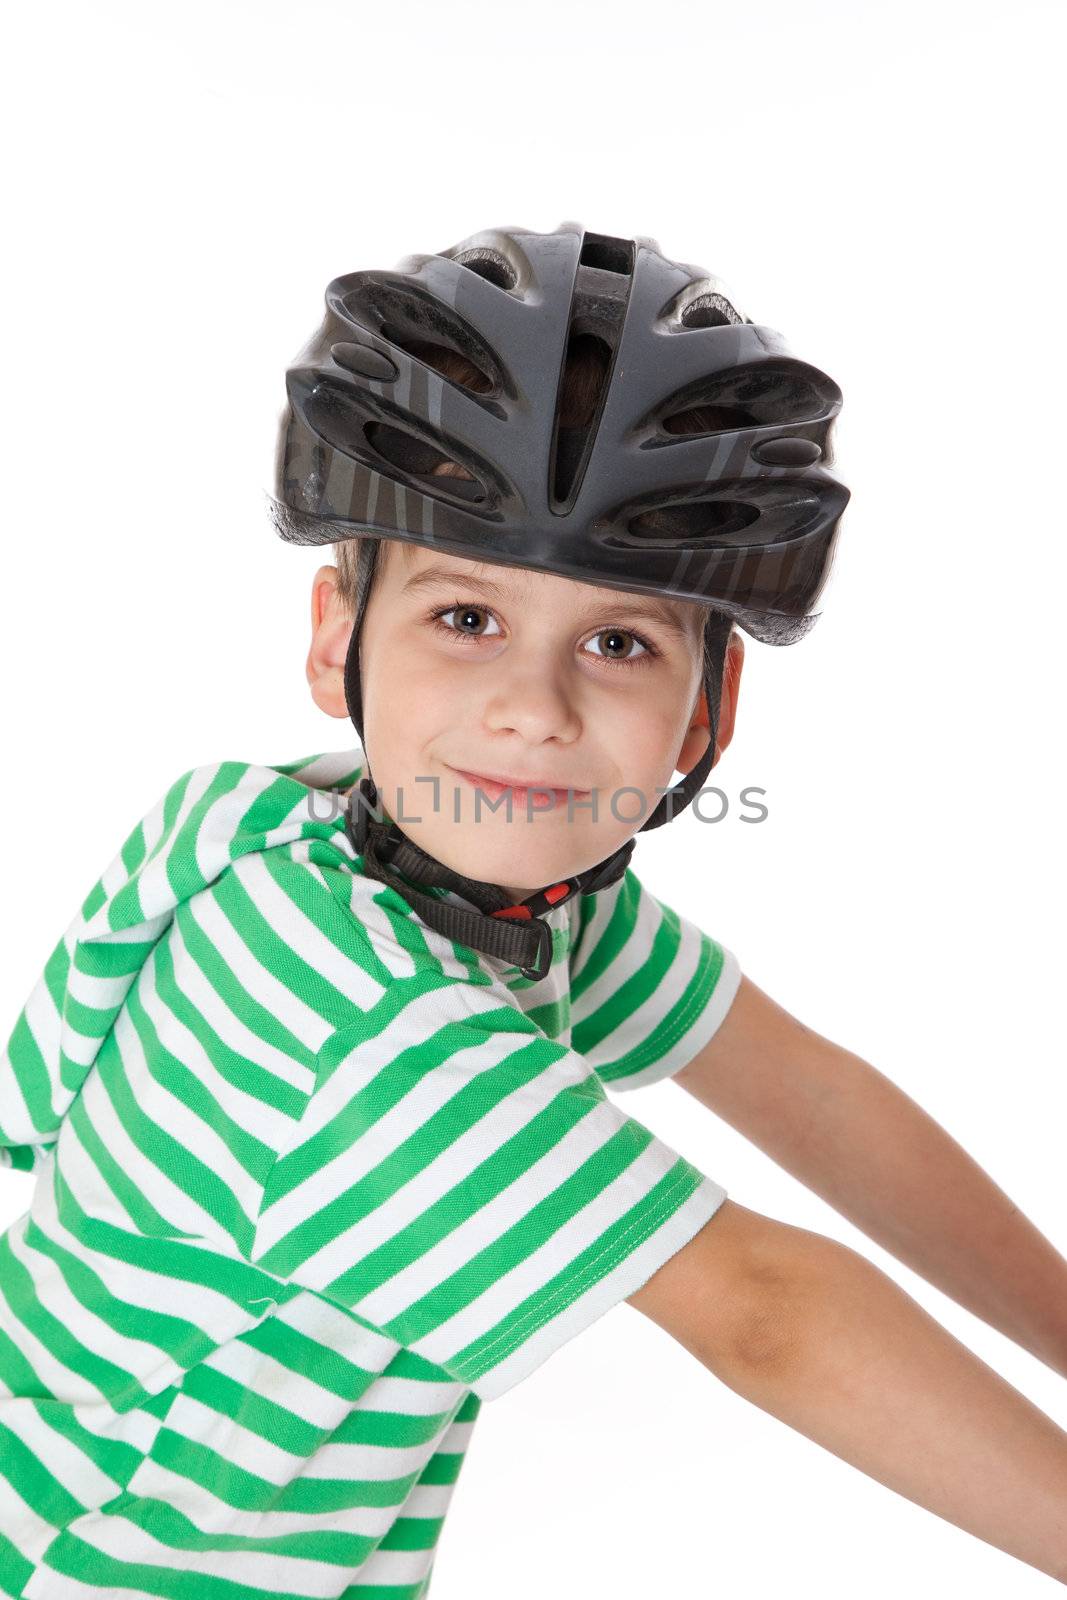 Boy bicyclist with helmet isolated on white